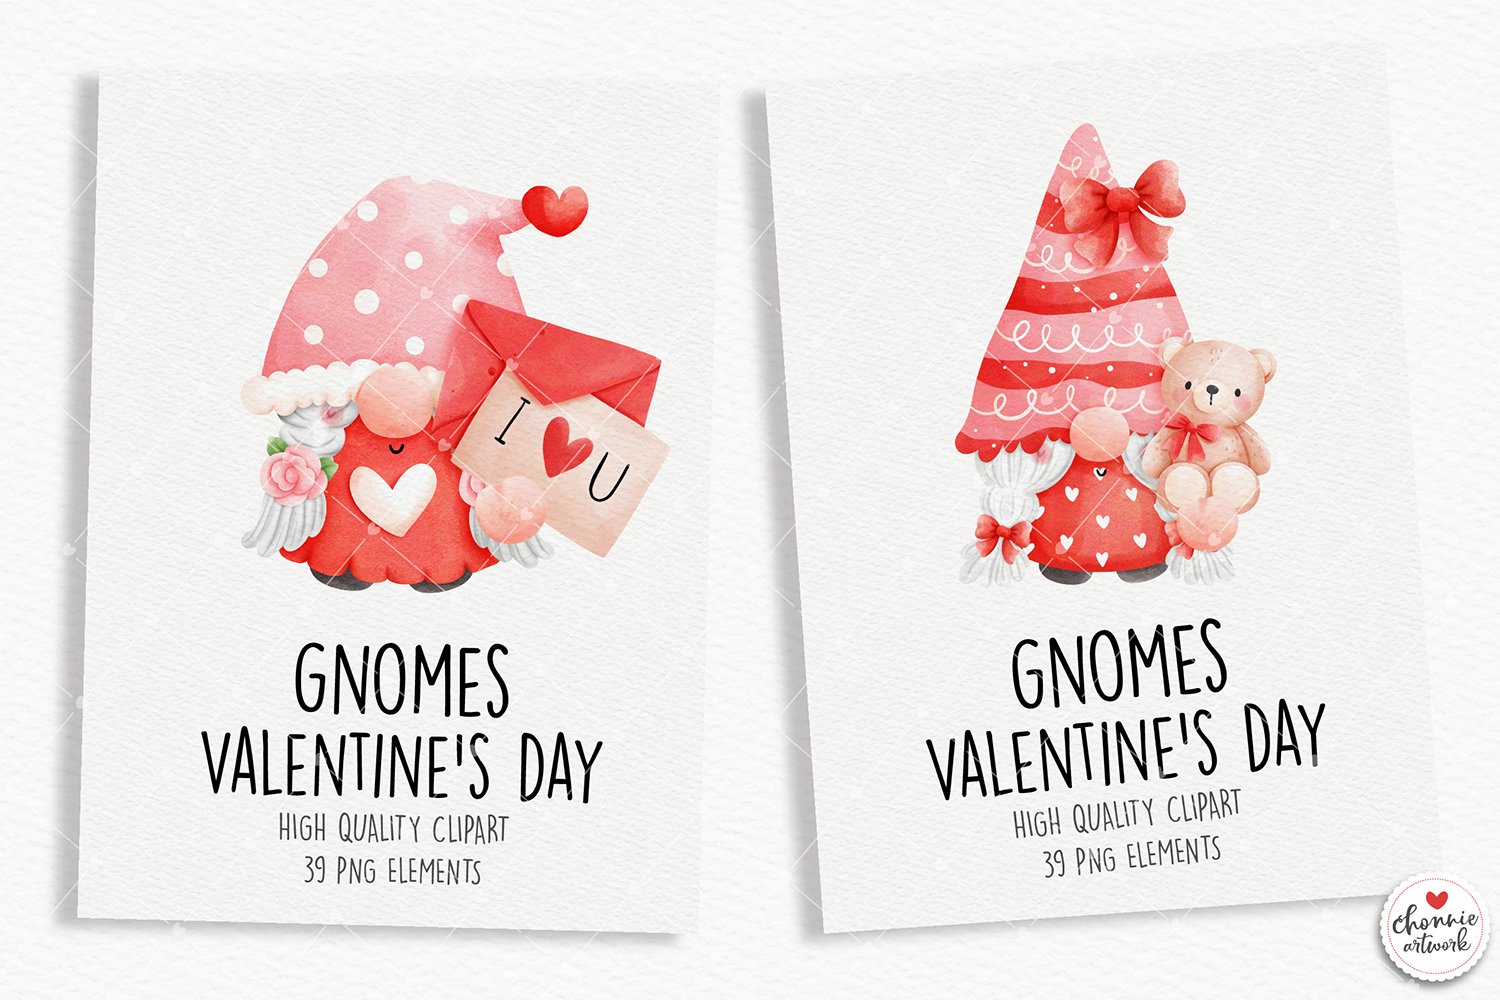 Cute Valentine's postcards with red gnomes.